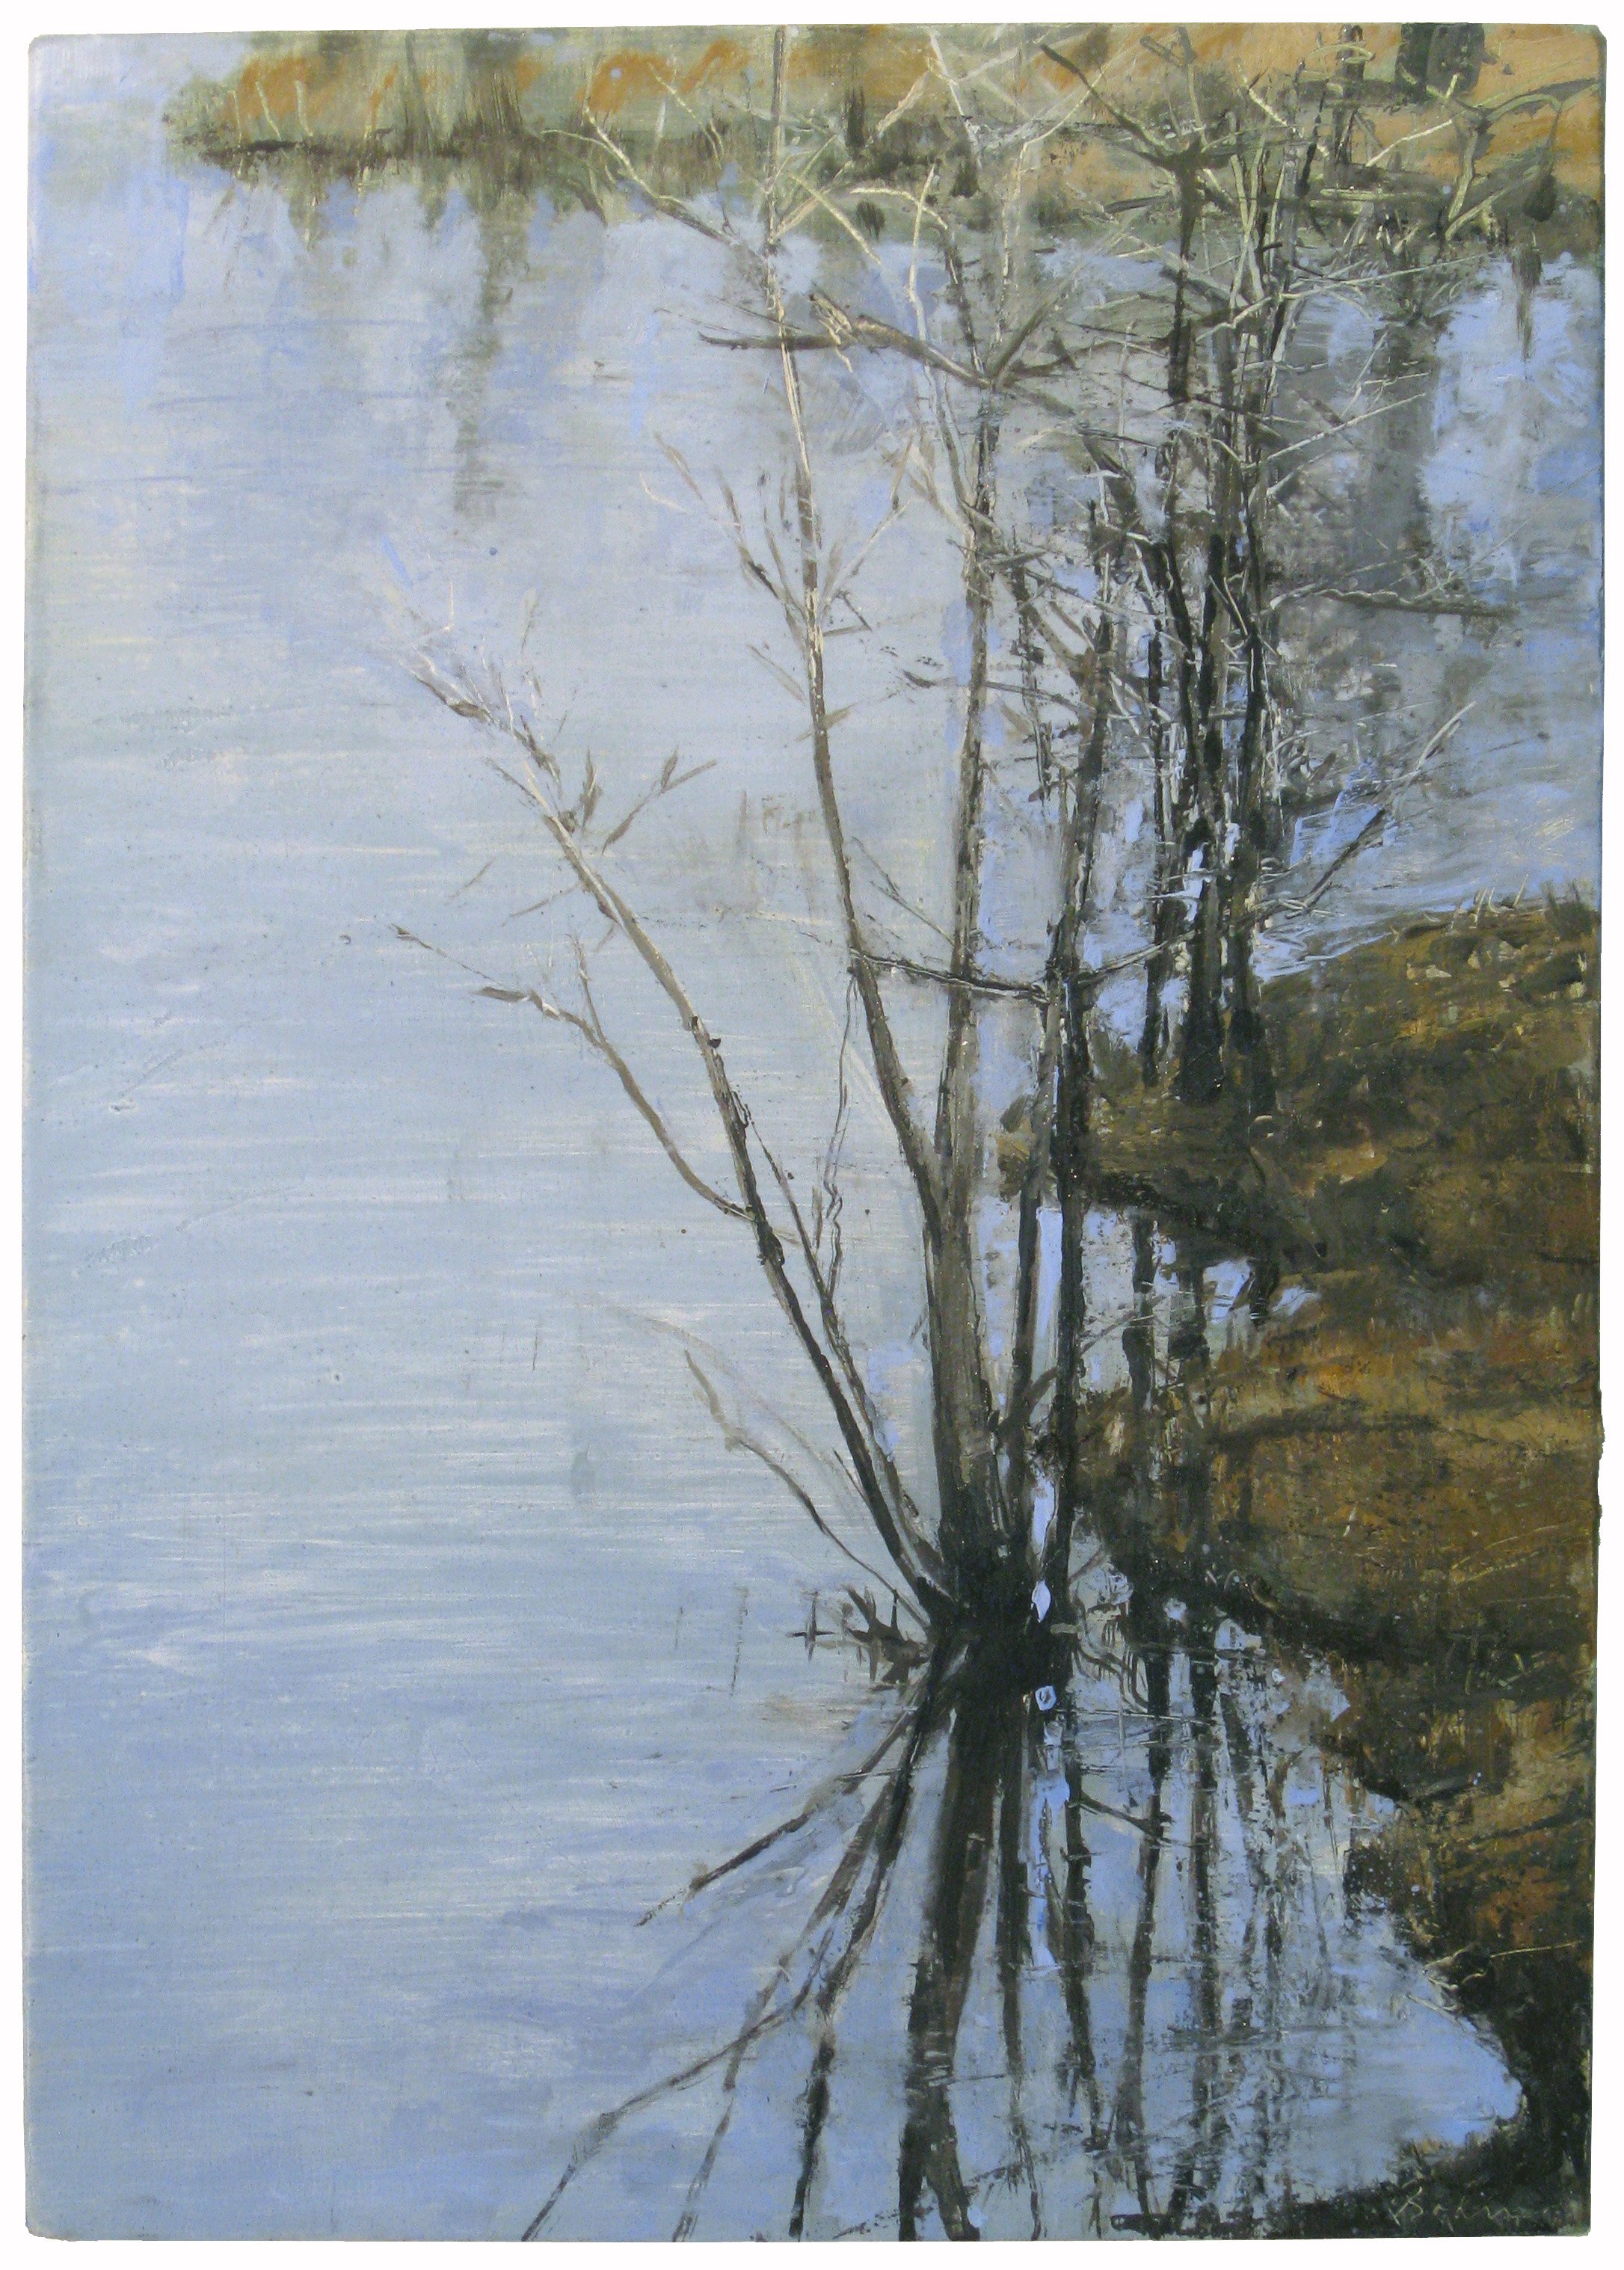  Pond Reflection 1 (study) 14x10 inches  (35.5x25.5cm) Oil on linen 2011 